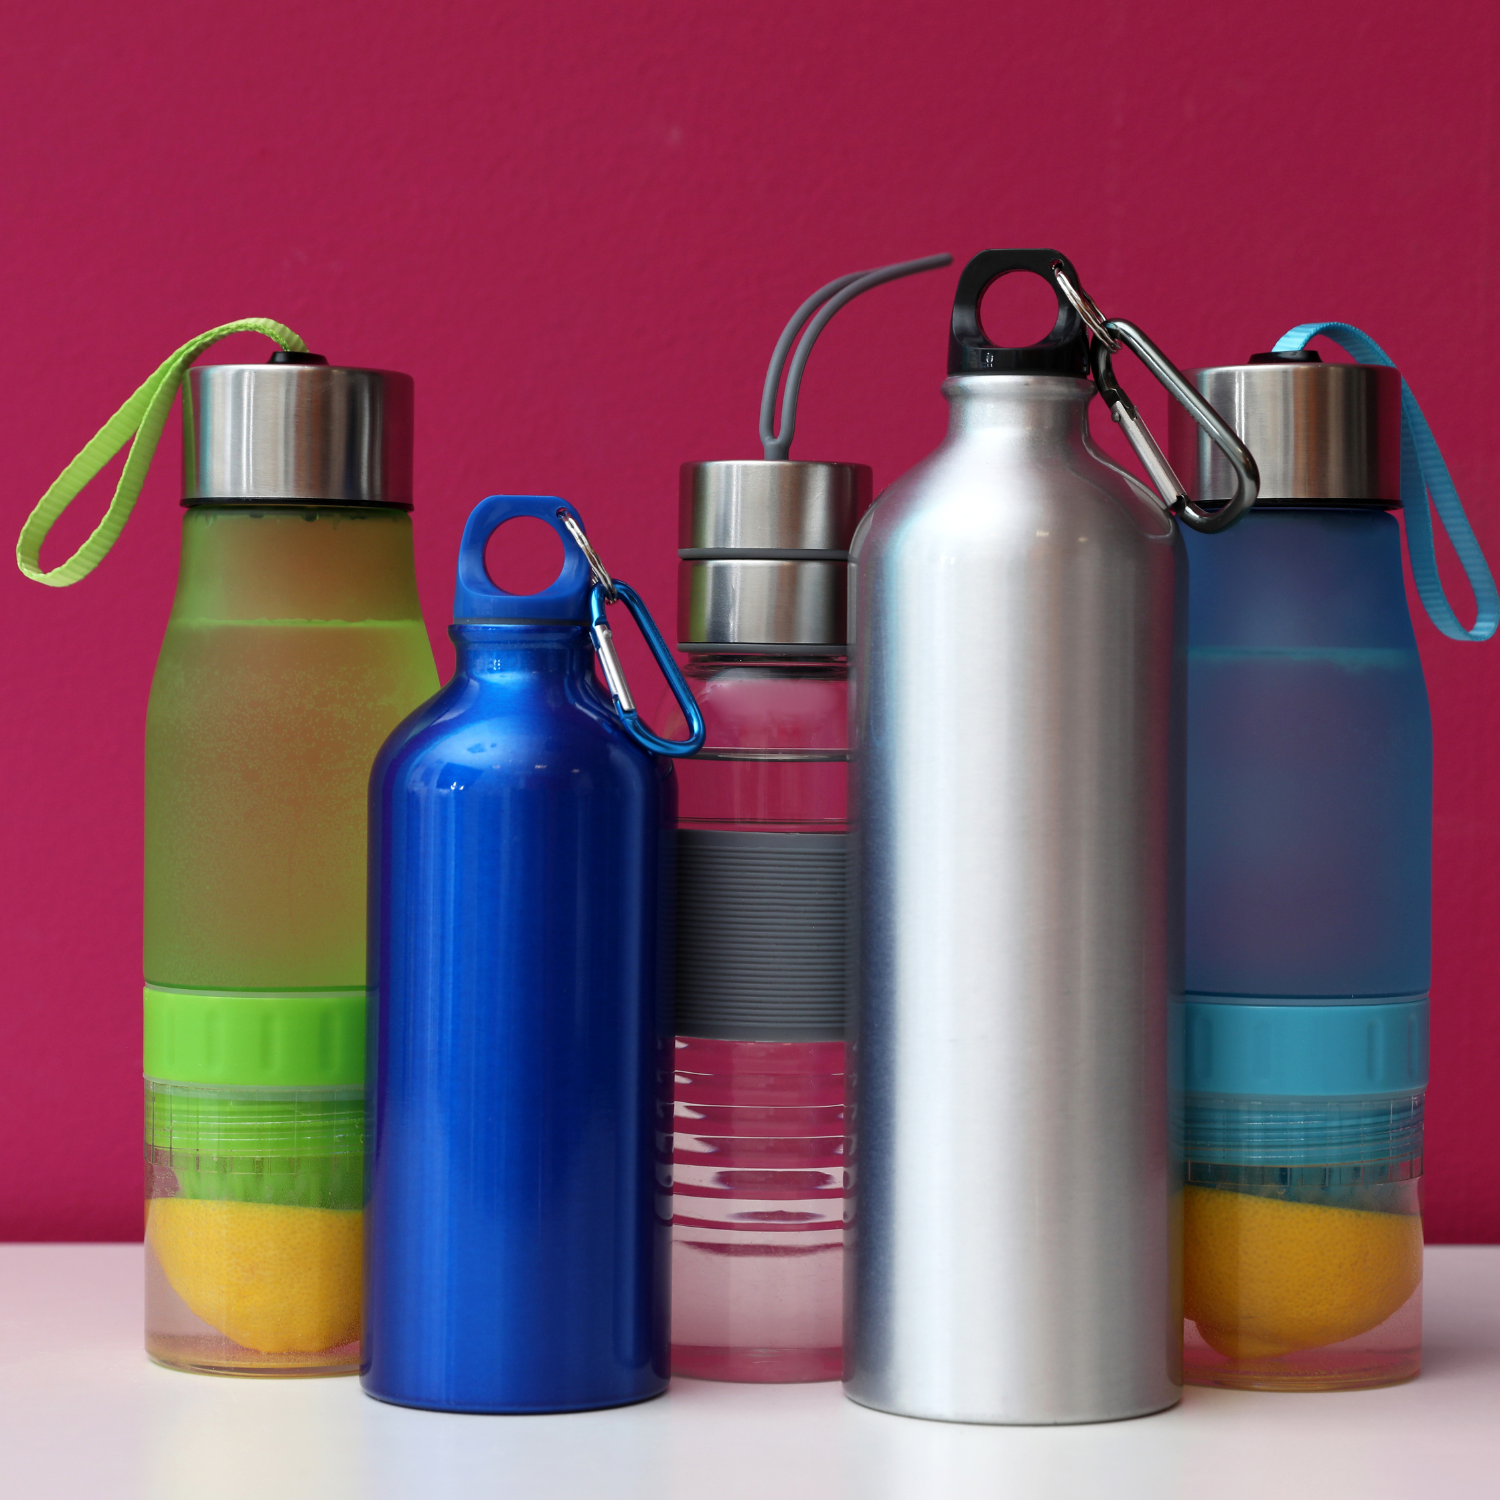 The Different Types of Water Bottles